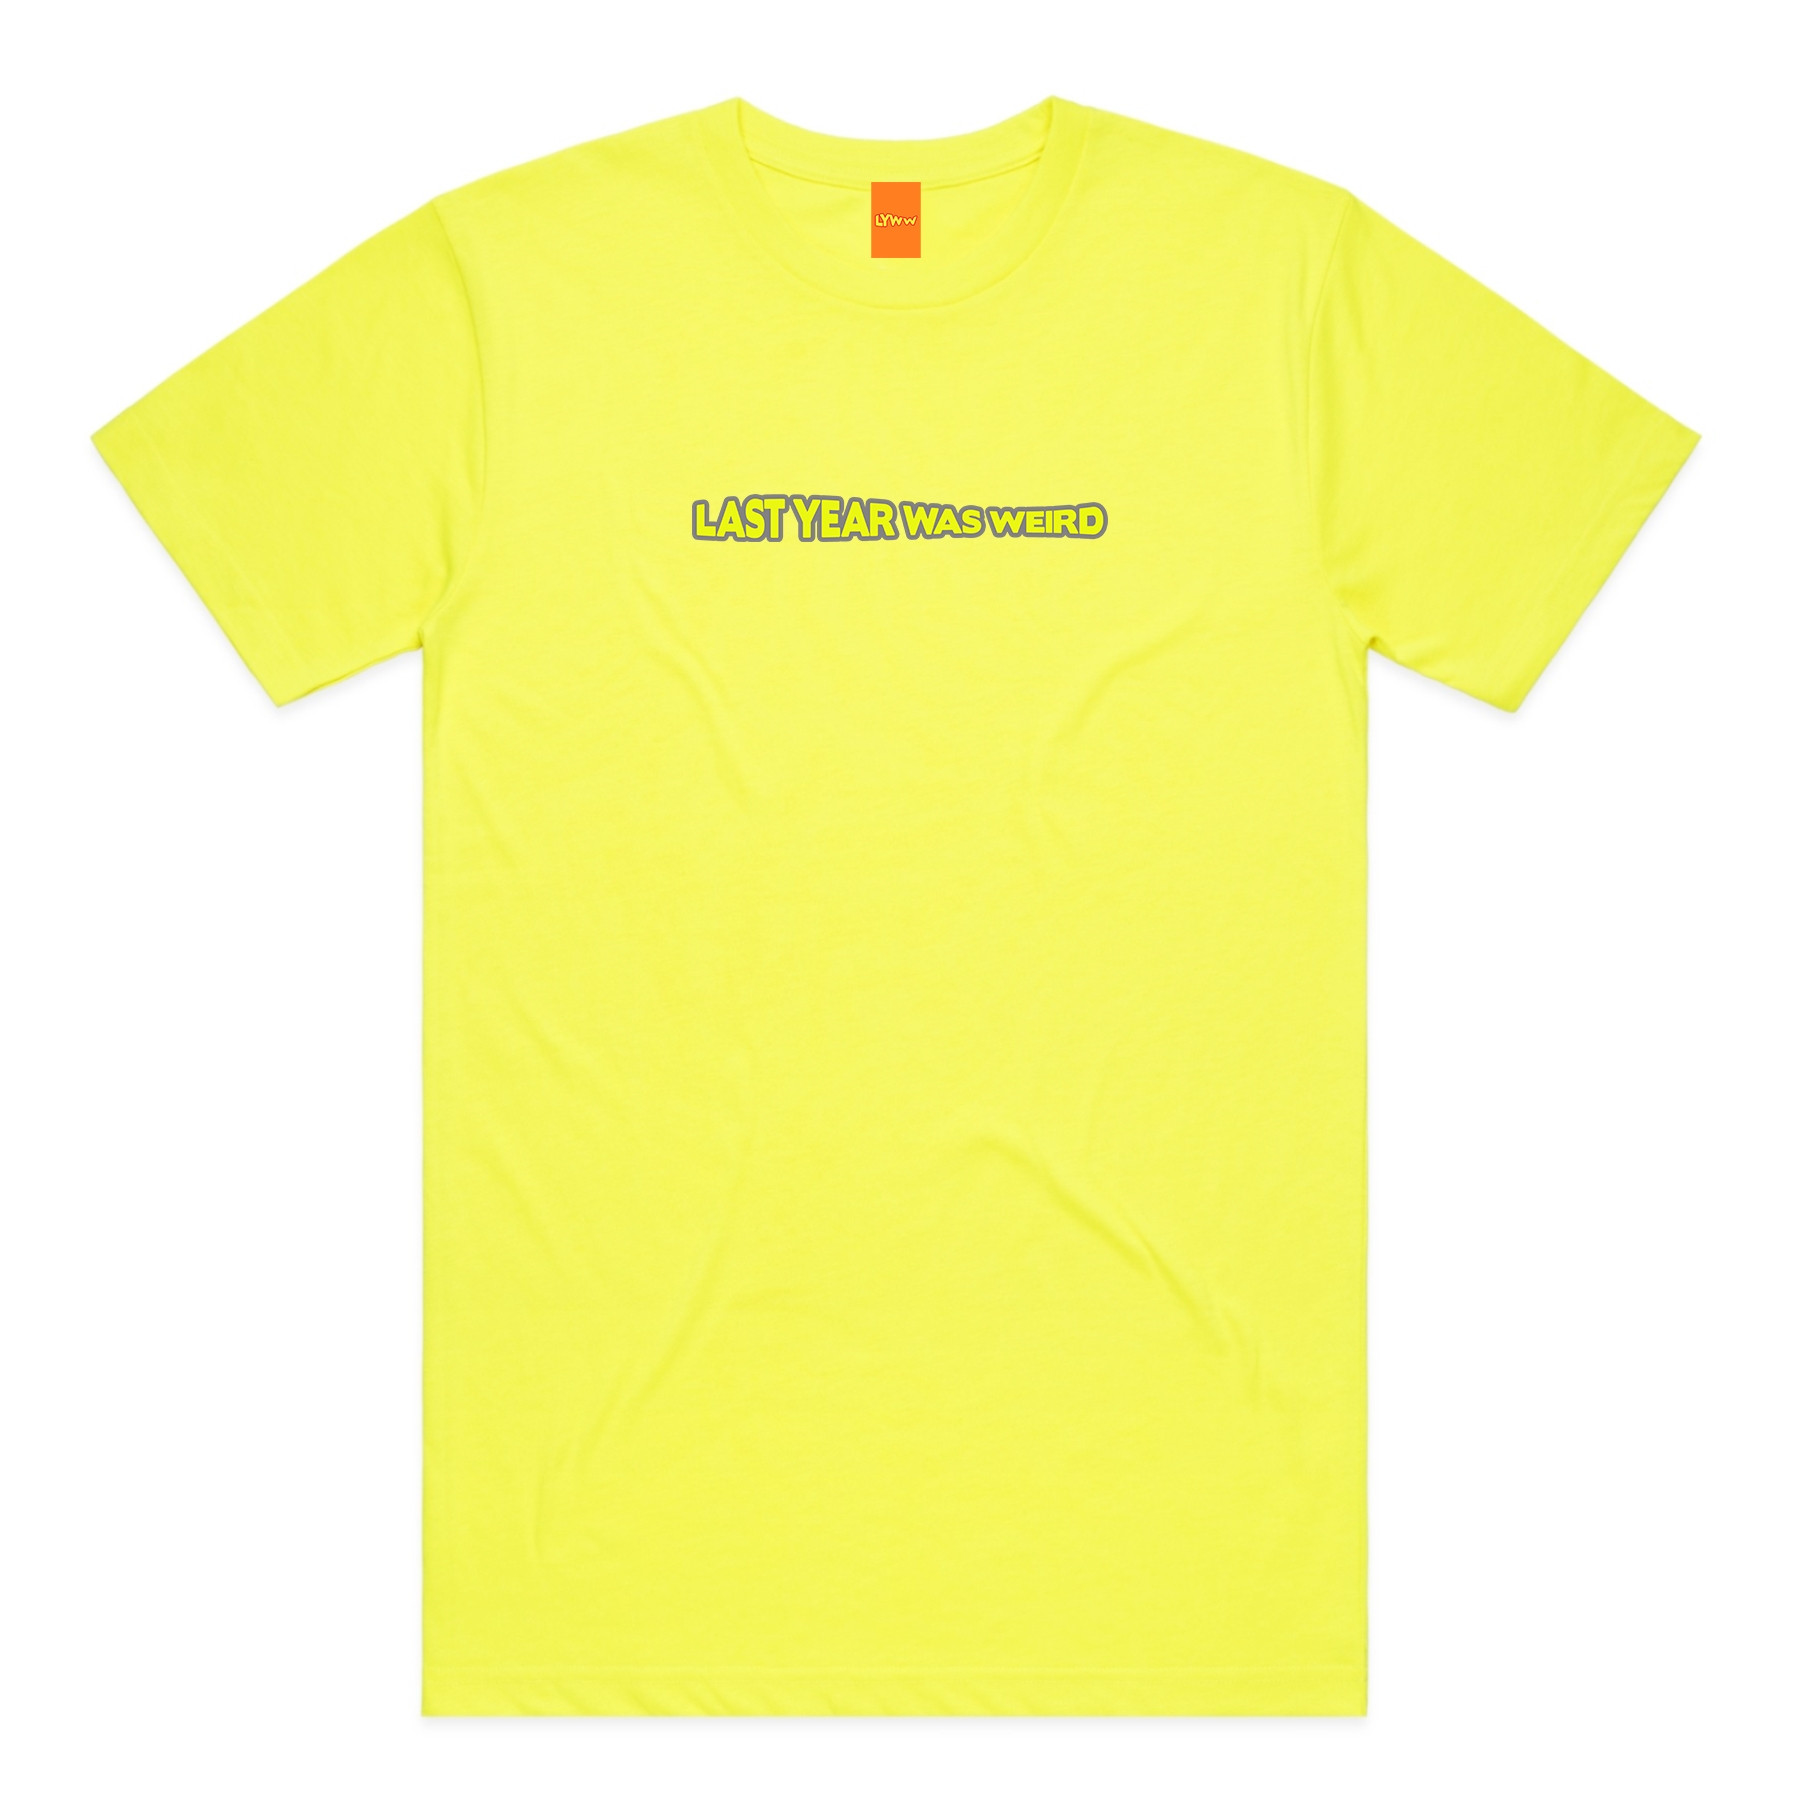 LYWW EMBROIDERED YELLOW TEE